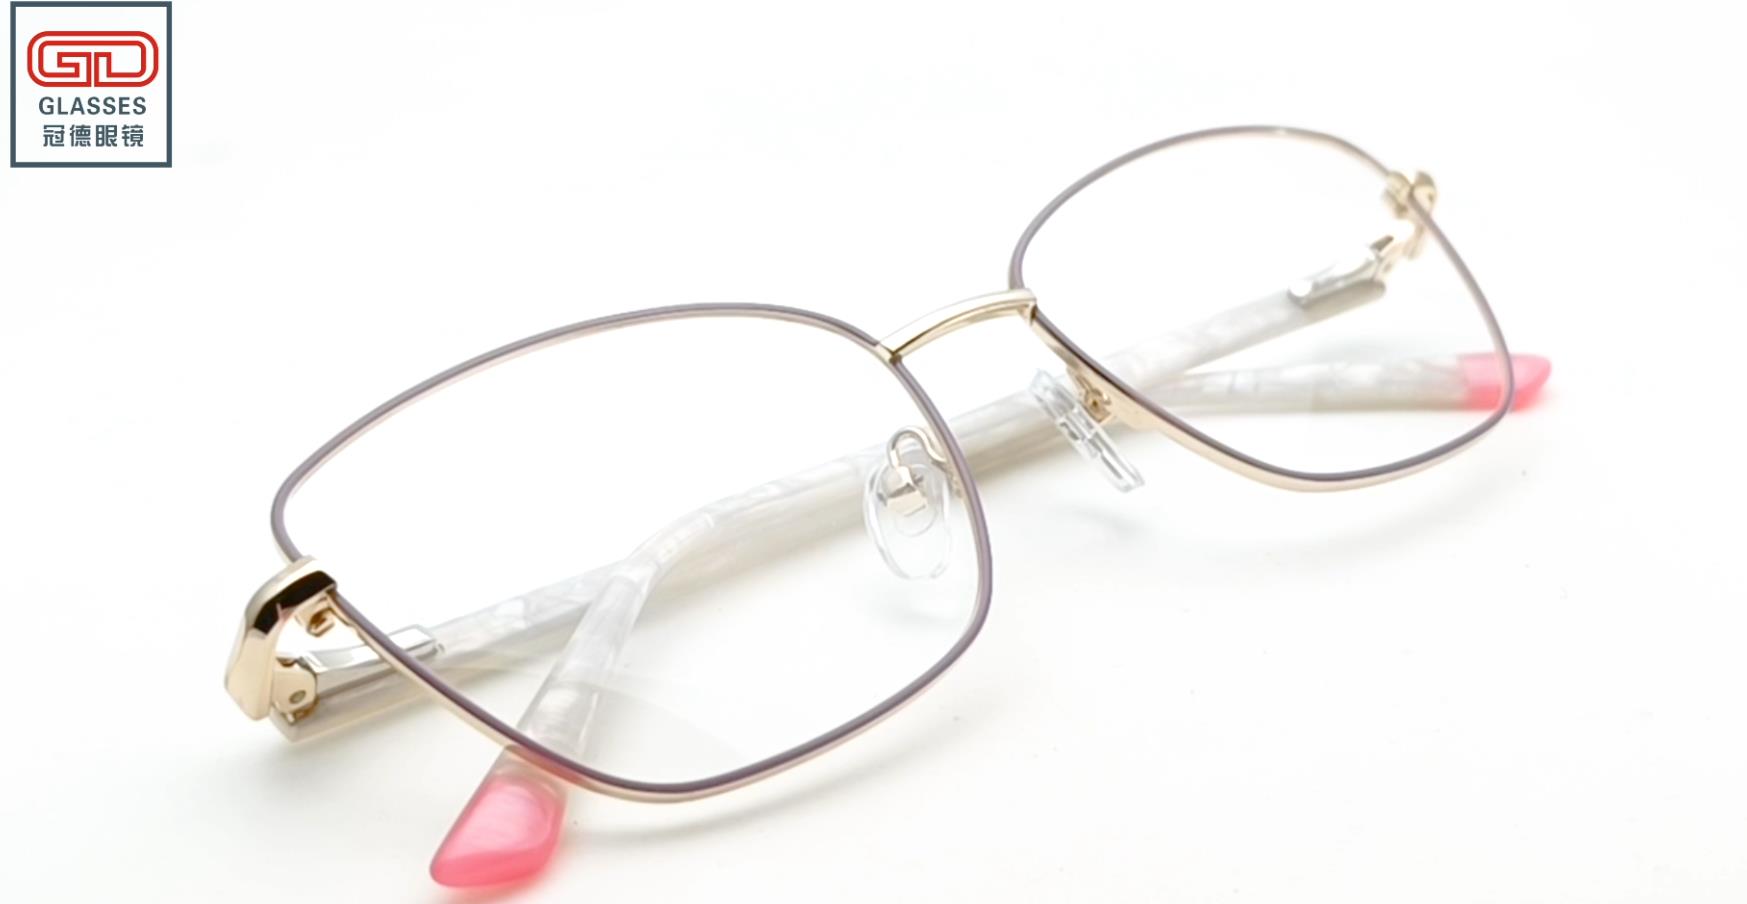 Protect Your Vision The Benefits of Wearing Glasses for Myopia